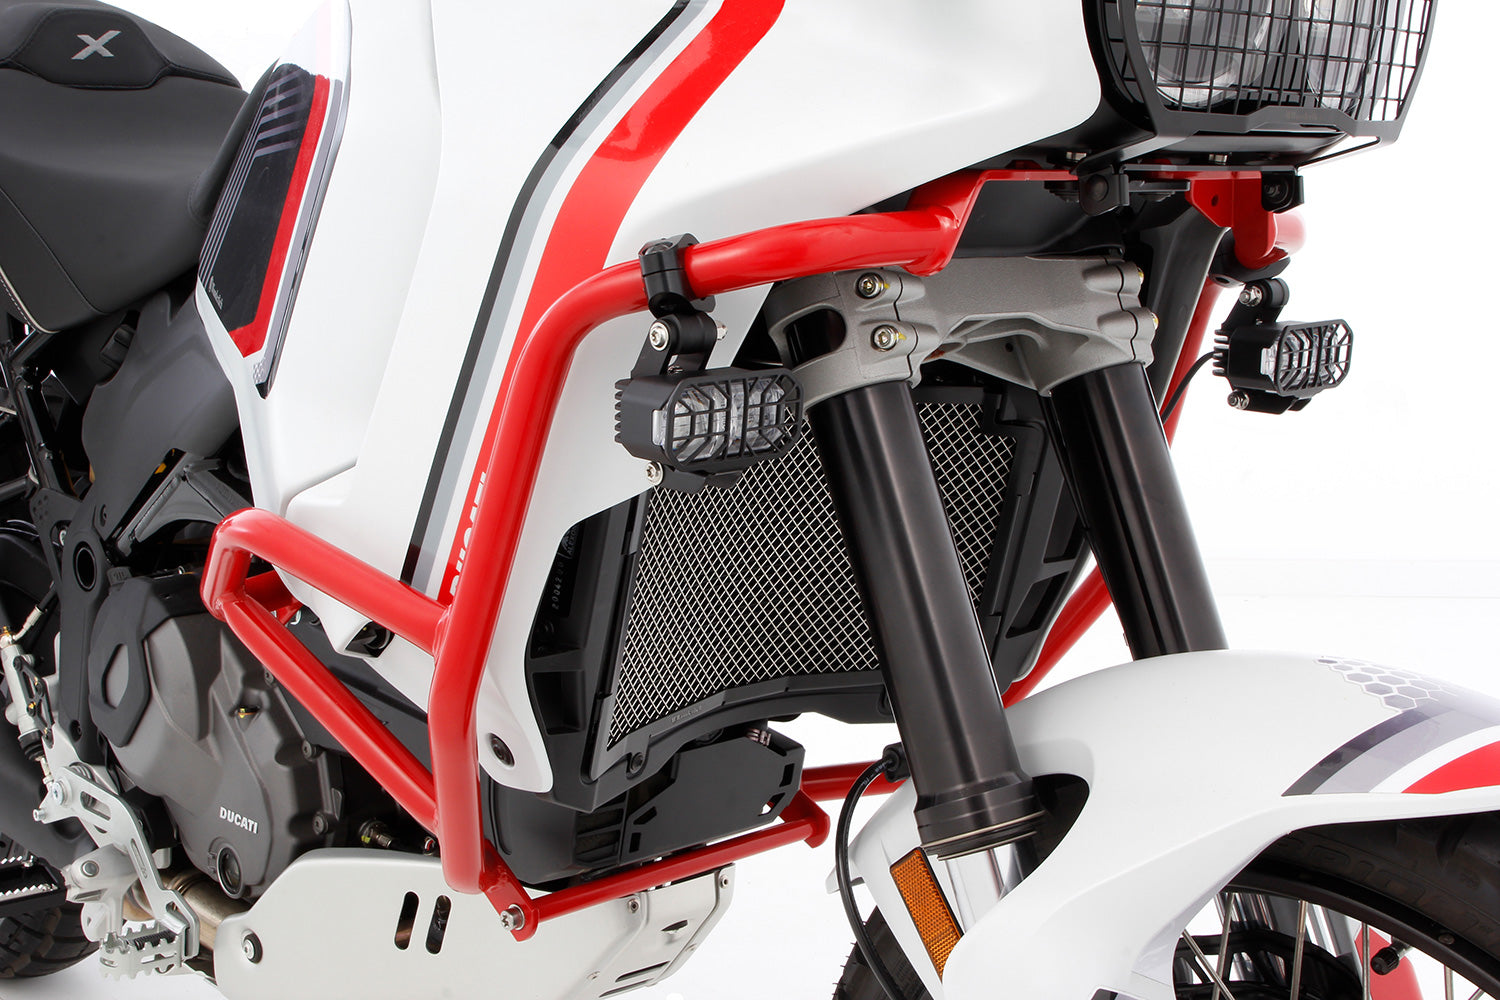 Wunderlich fairing protection bar - red - For models with Standard engine protection